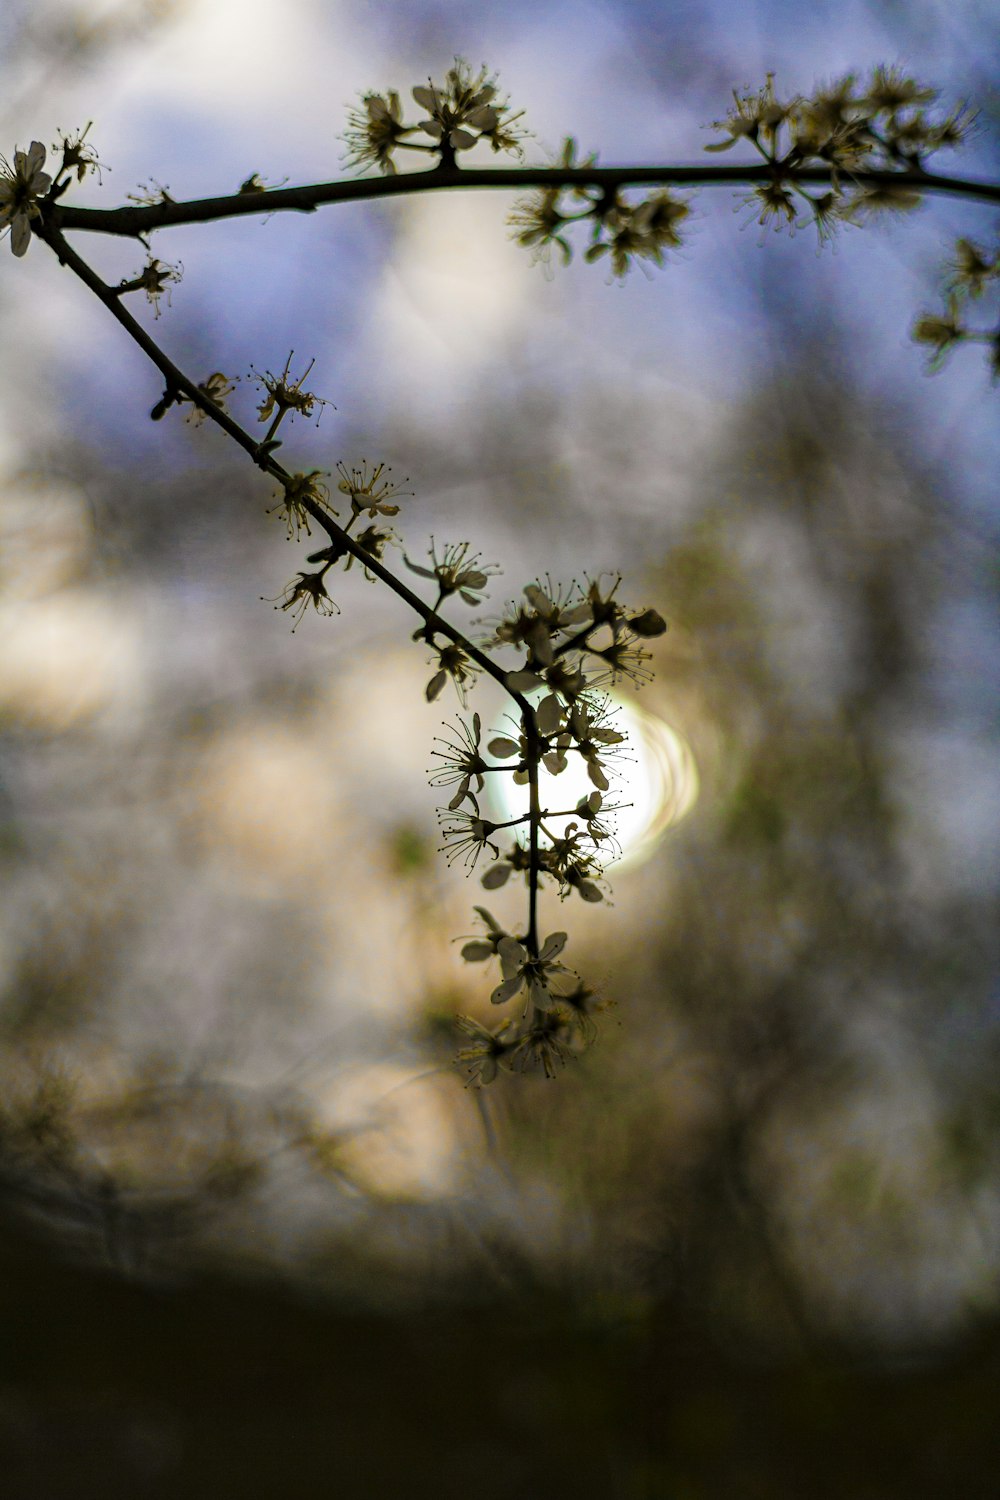 a close up of a tree branch with a sun in the background